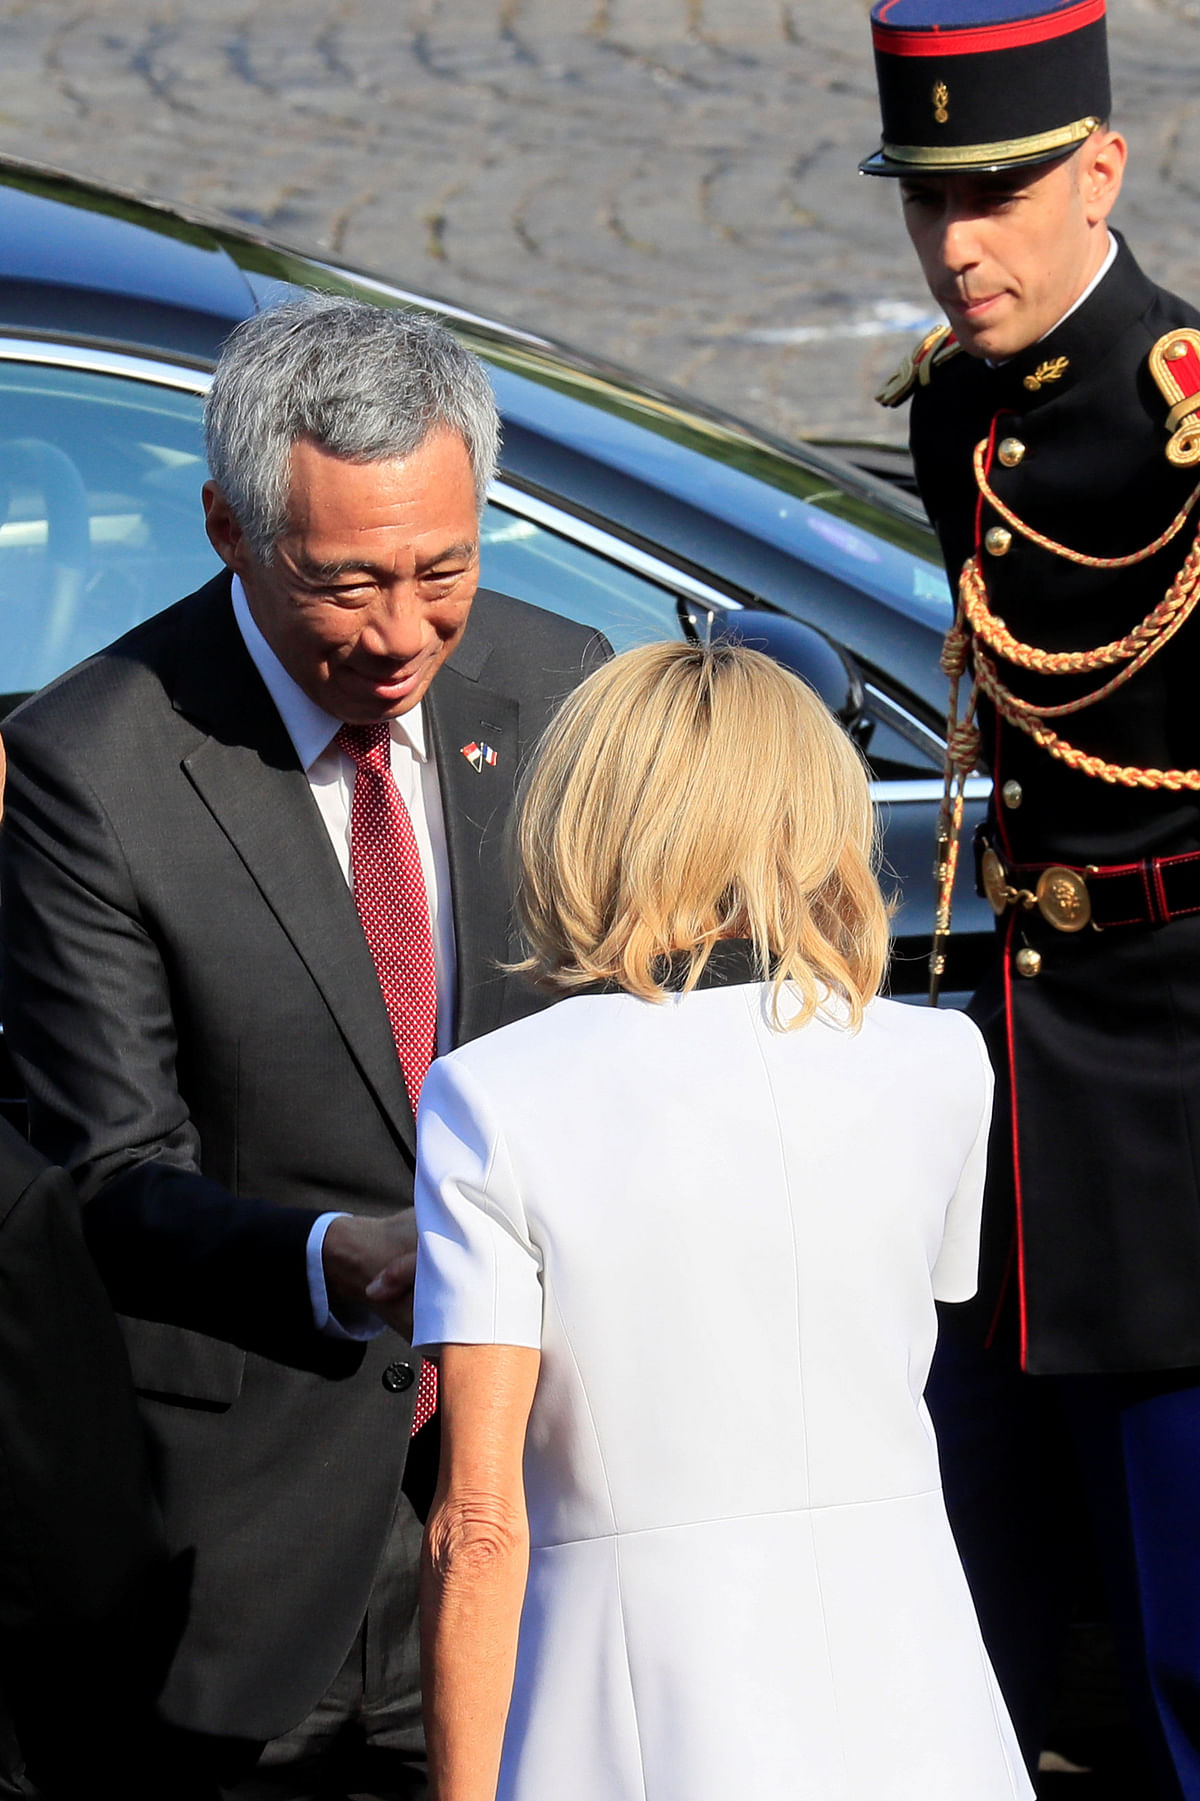 Brigitte Macron, wife of French president Emmanuel Macron, greets Singapore`s prime minister Lee Hsien Loong as he arrives to attend the traditional Bastille Day military parade on the Champs-Elysees Avenue in Paris, France, 14 July 2018. Reuters